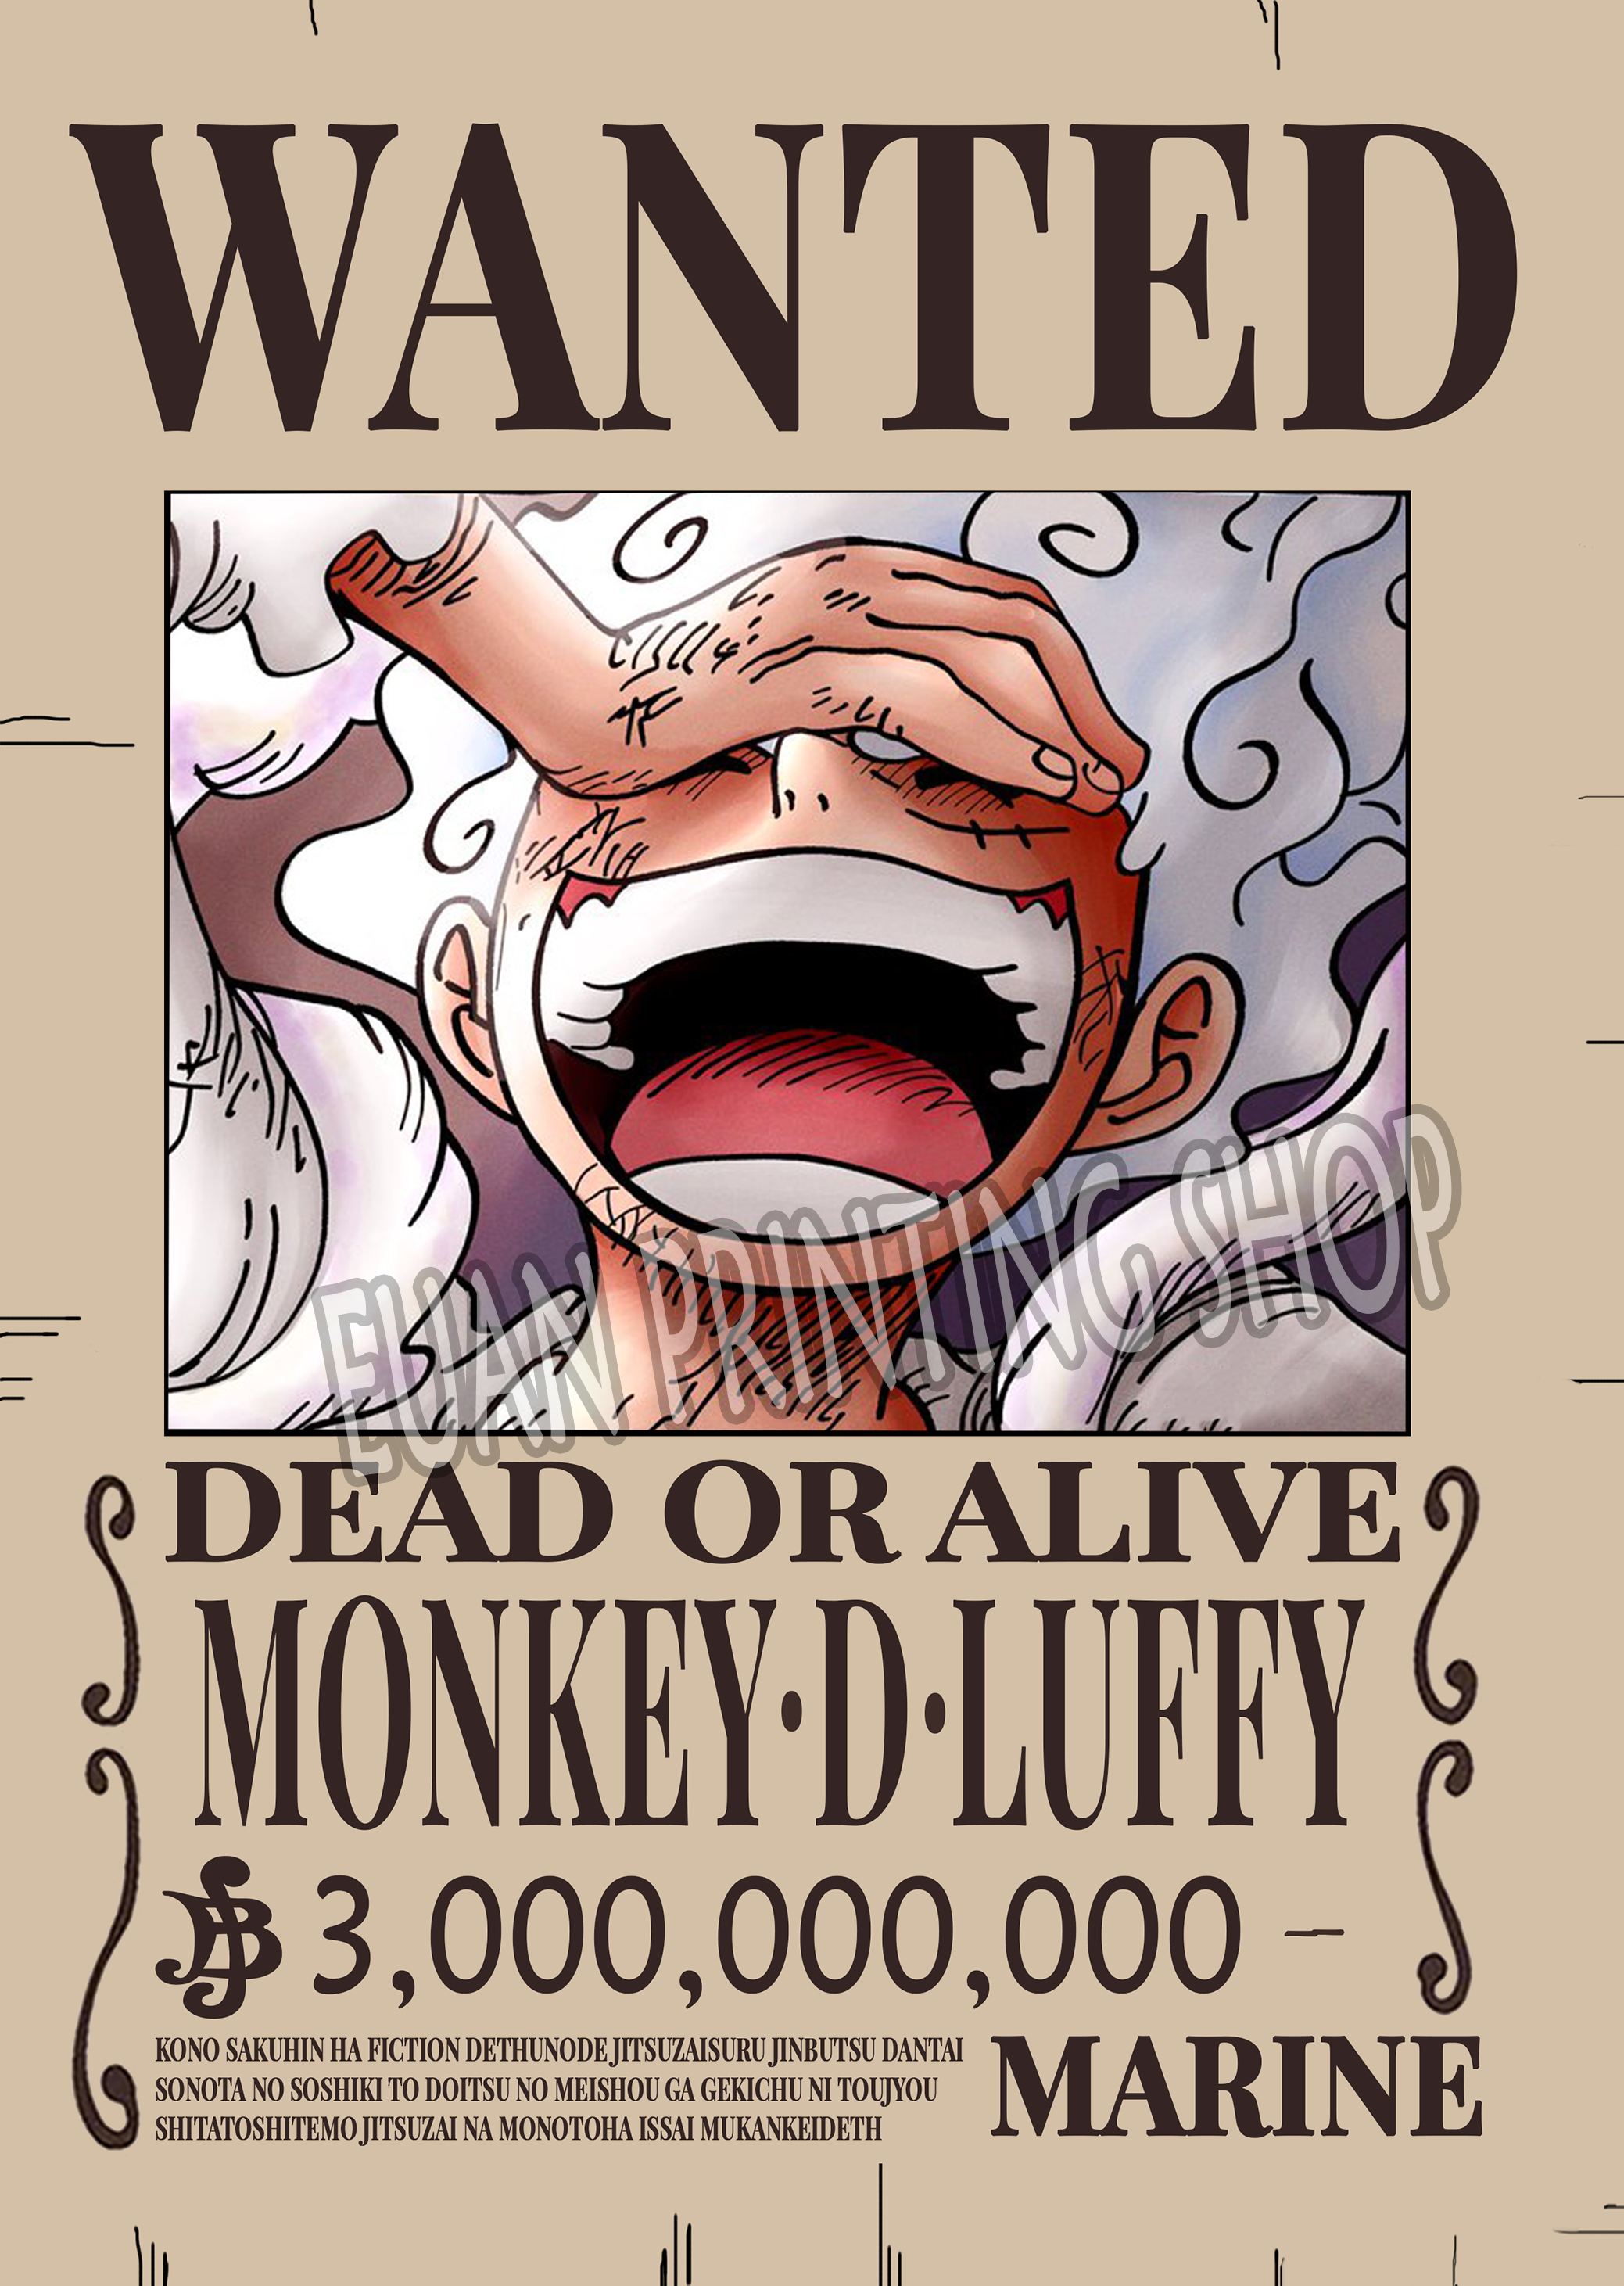 ONE PIECE HD UPDATED BOUNTY WANTED POSTERS Cm X Cm PCS MINIMUM ORDER Lazada PH